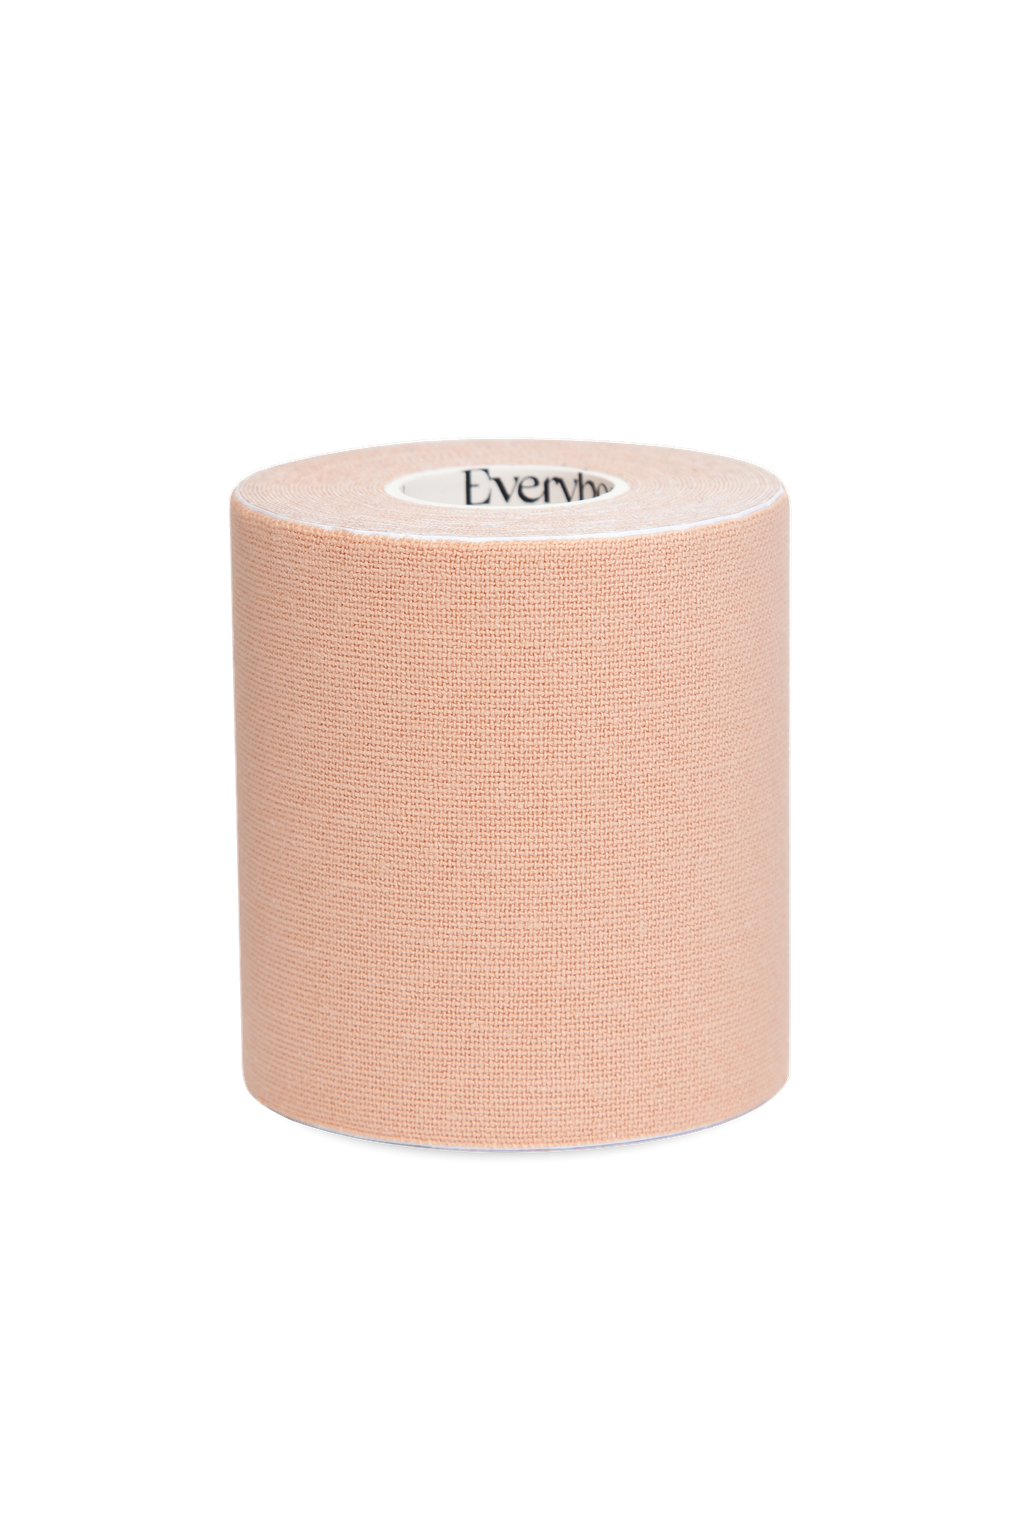 Our best selling Boob Tape Roll in Beige. 7.5cm width and 5m long